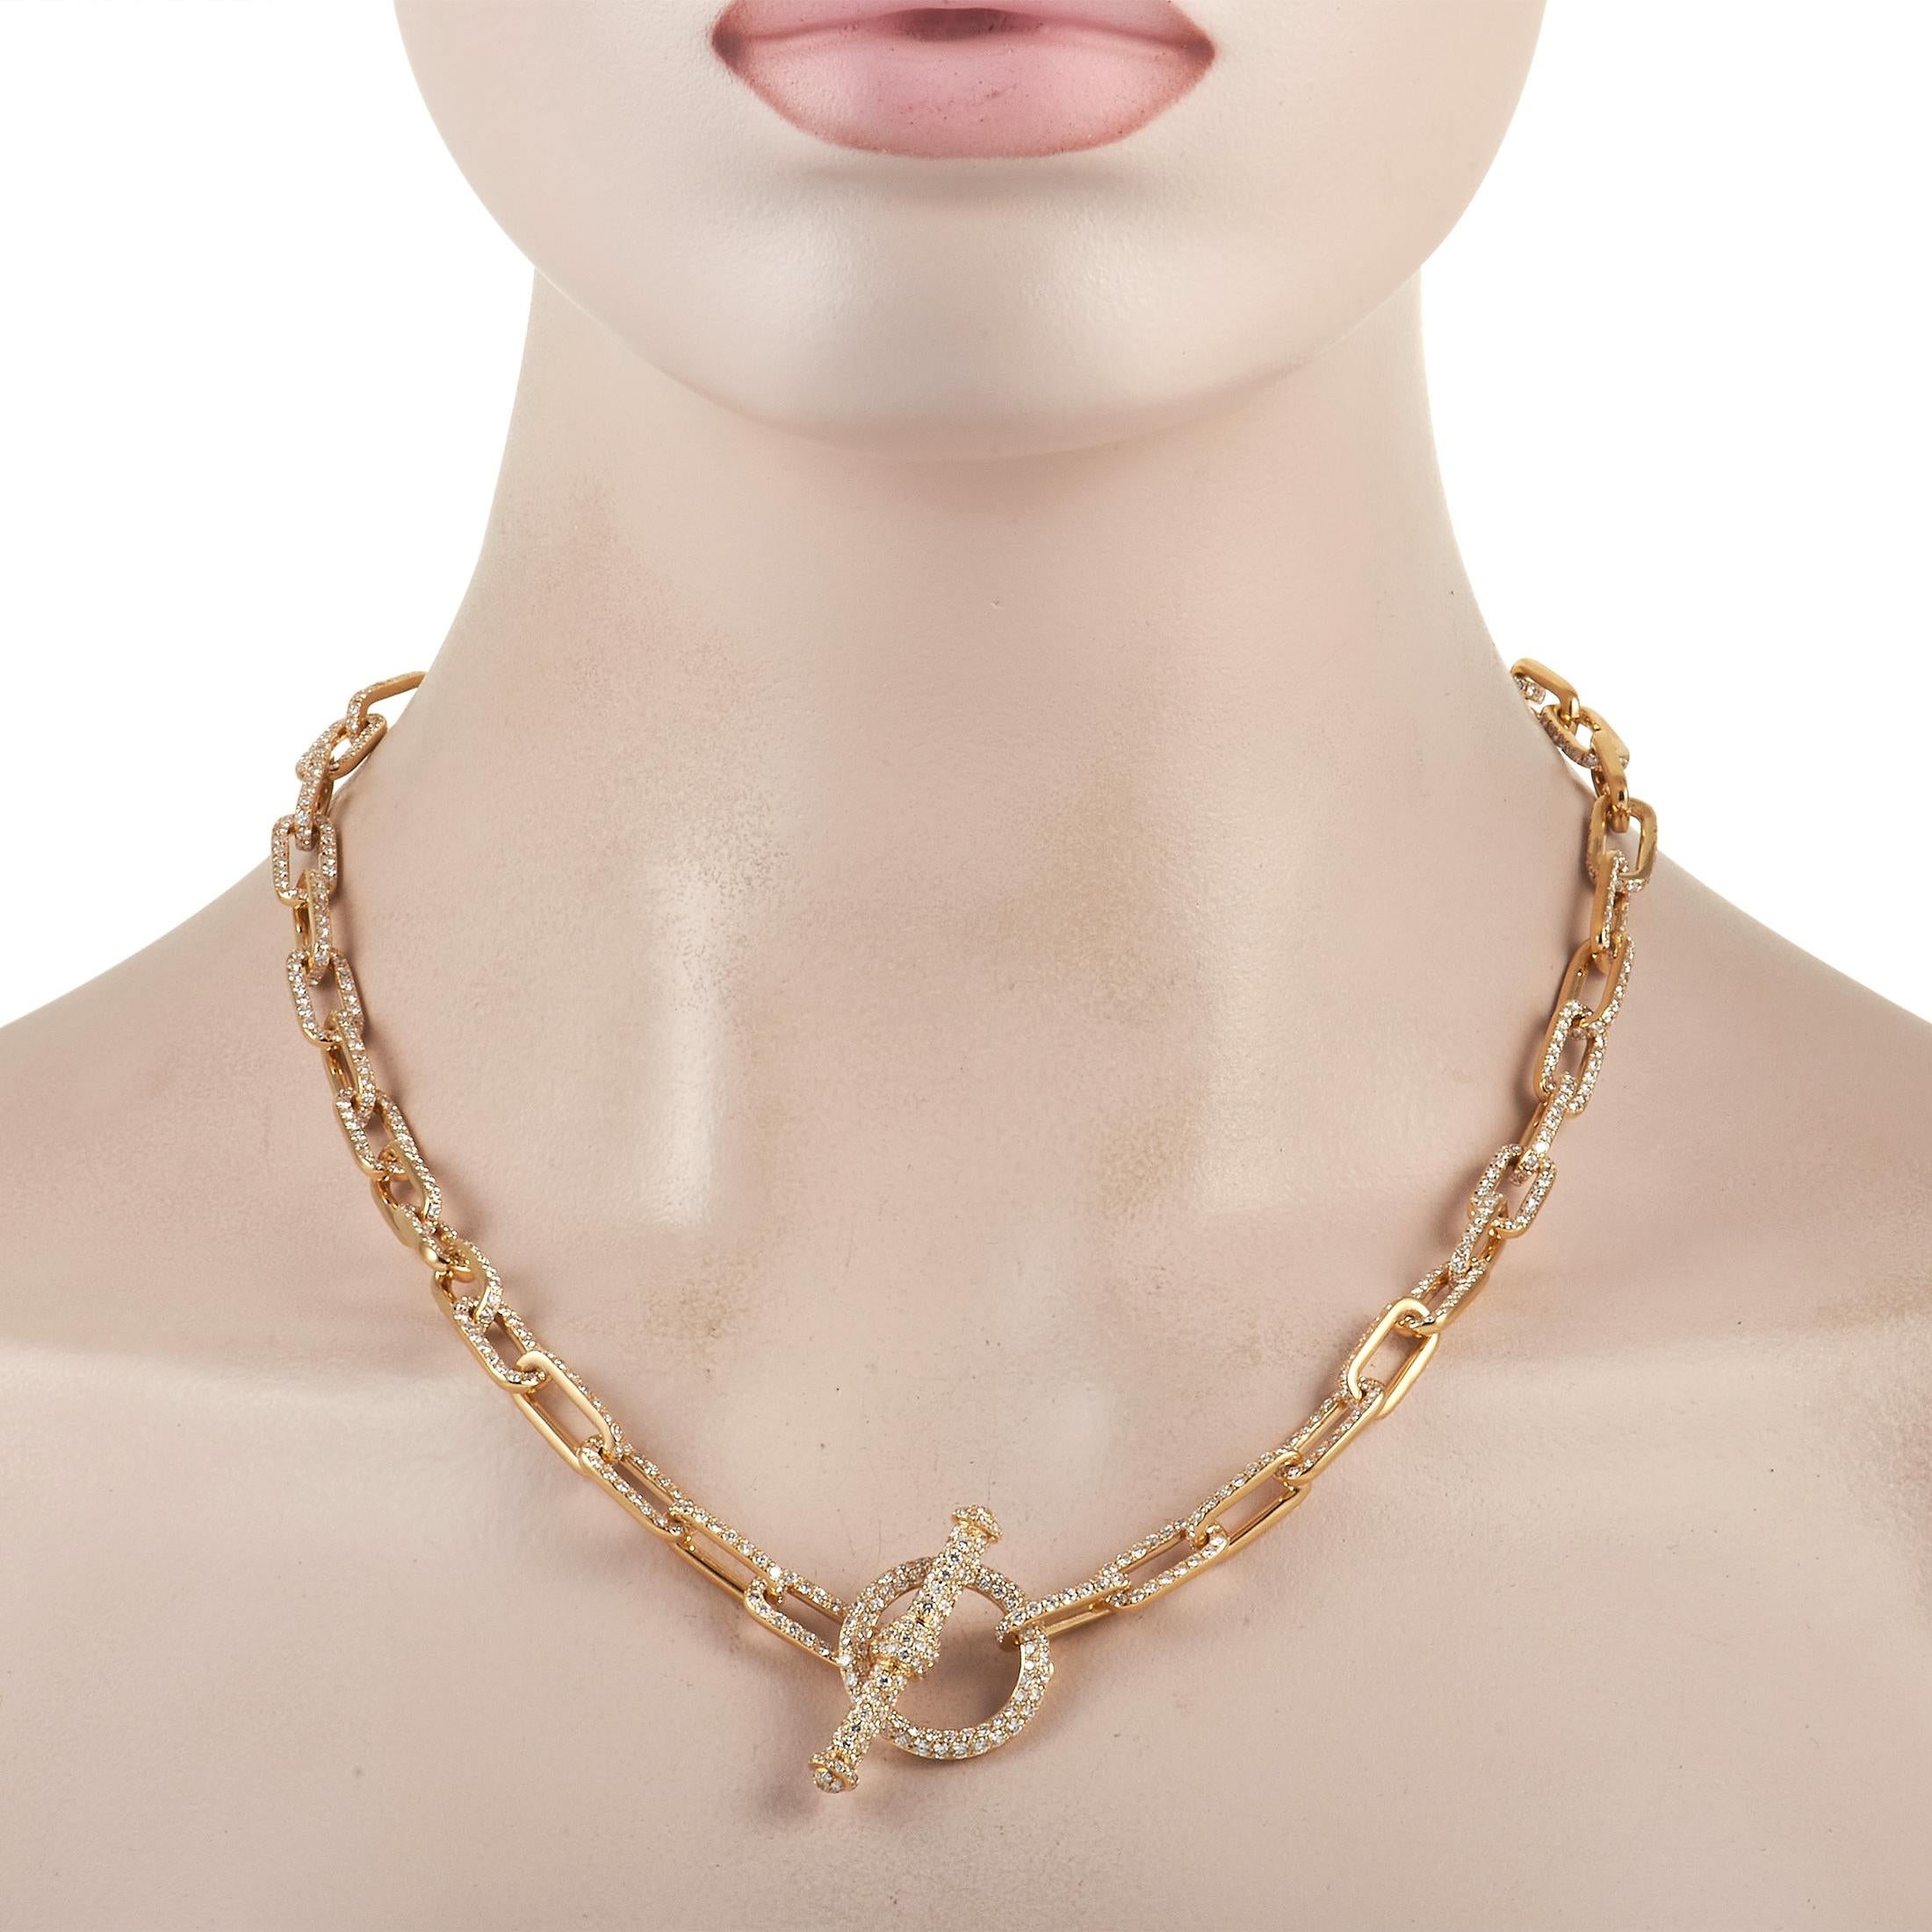 Channel an edgy-glam vibe with this LB Exclusive 14K Yellow Gold 20.37 ct Diamond Link Necklace. It features a link chain necklace measuring 21 inches long. Each link comes adorned with glittering diamonds. It is secured by a diamond-embellished